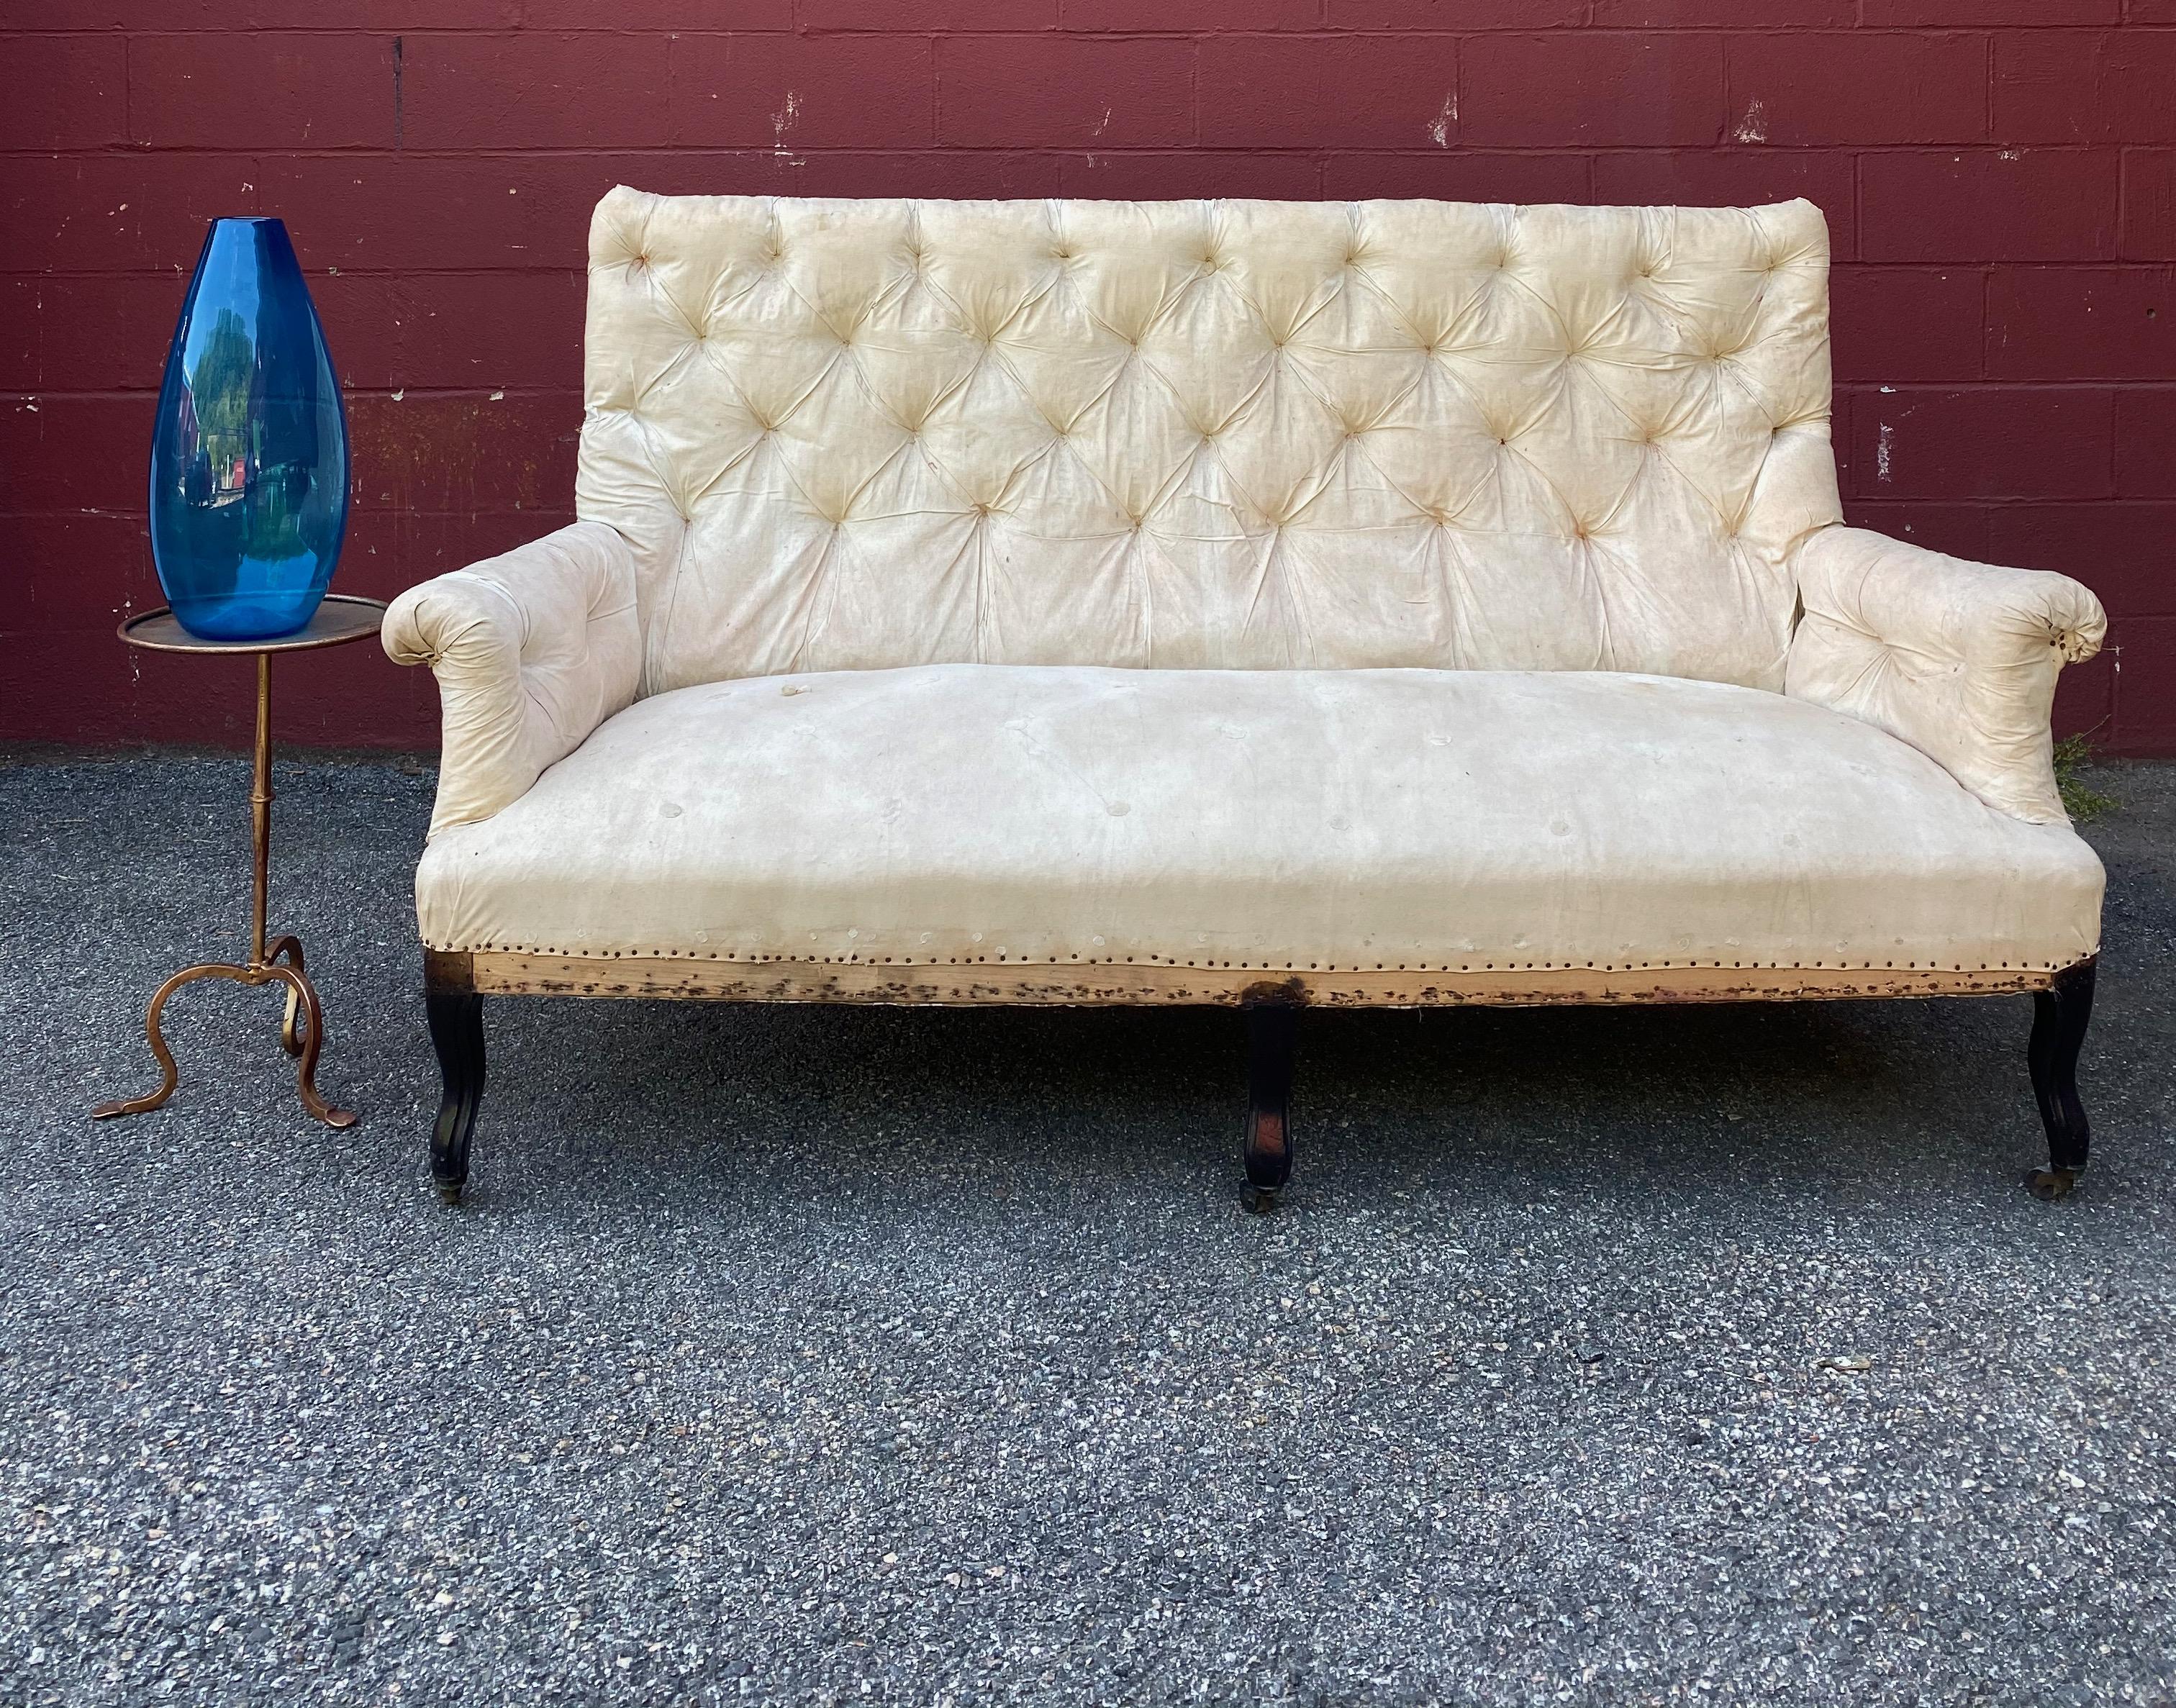 Large scale Napoleon III sofa with cabriole legs. The back is heavily tufted as are the rolled arms. The sofa has been stripped down to the muslin and is ready to be upholstered. 
French, late 19th century.
Dimensions: 70” W x 30” D  x 39” H (15”